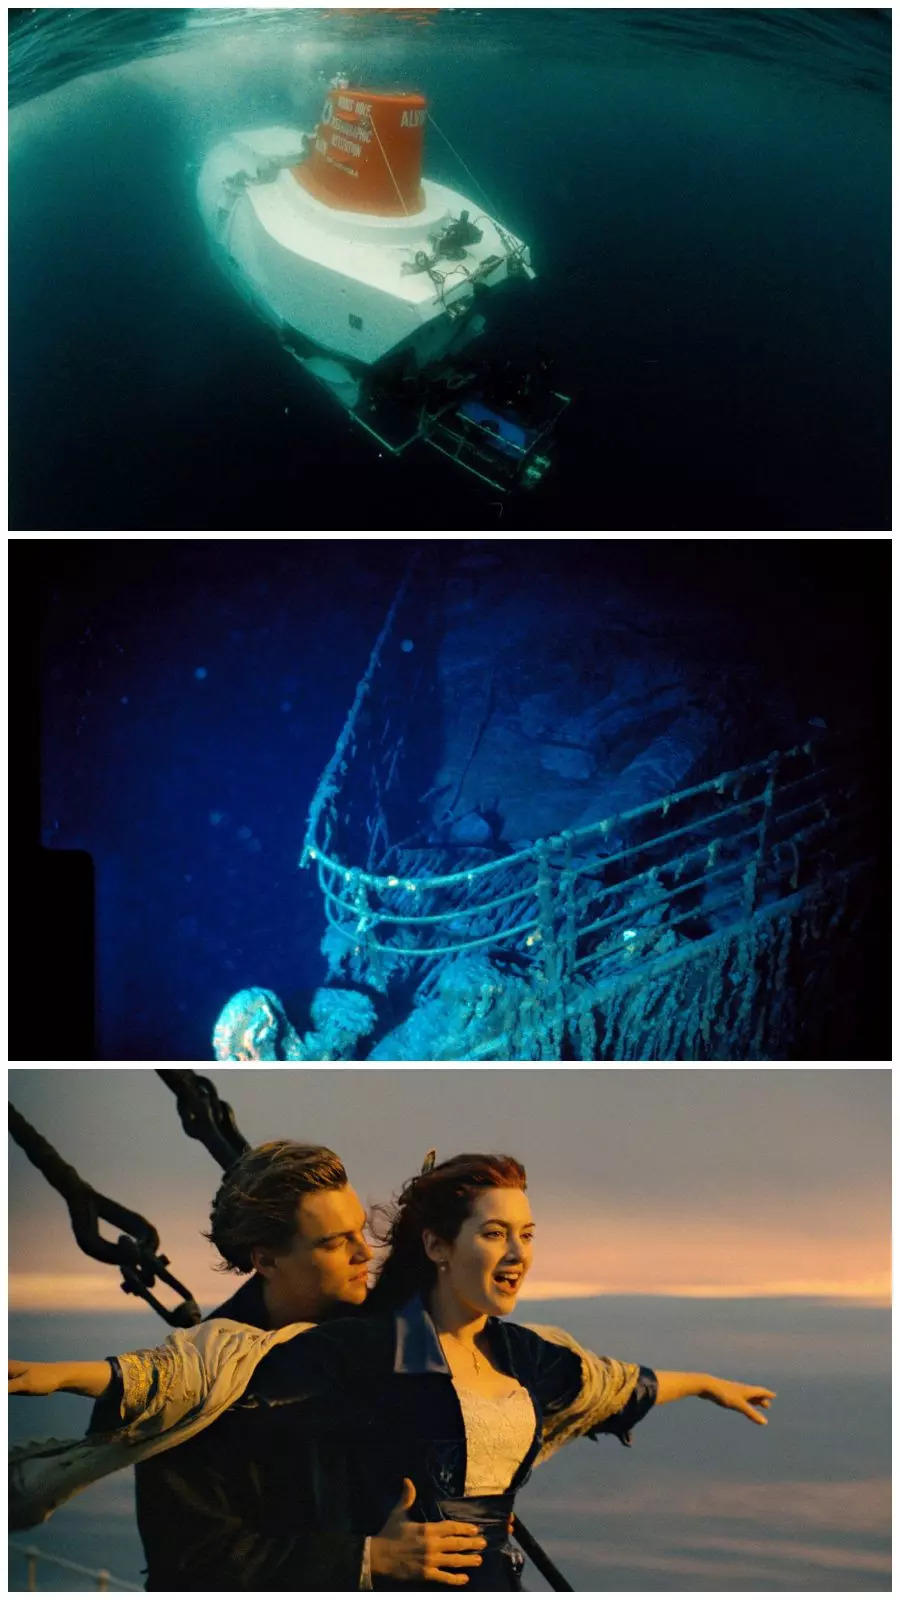 See new footage of the Titanic wreck from the '80s